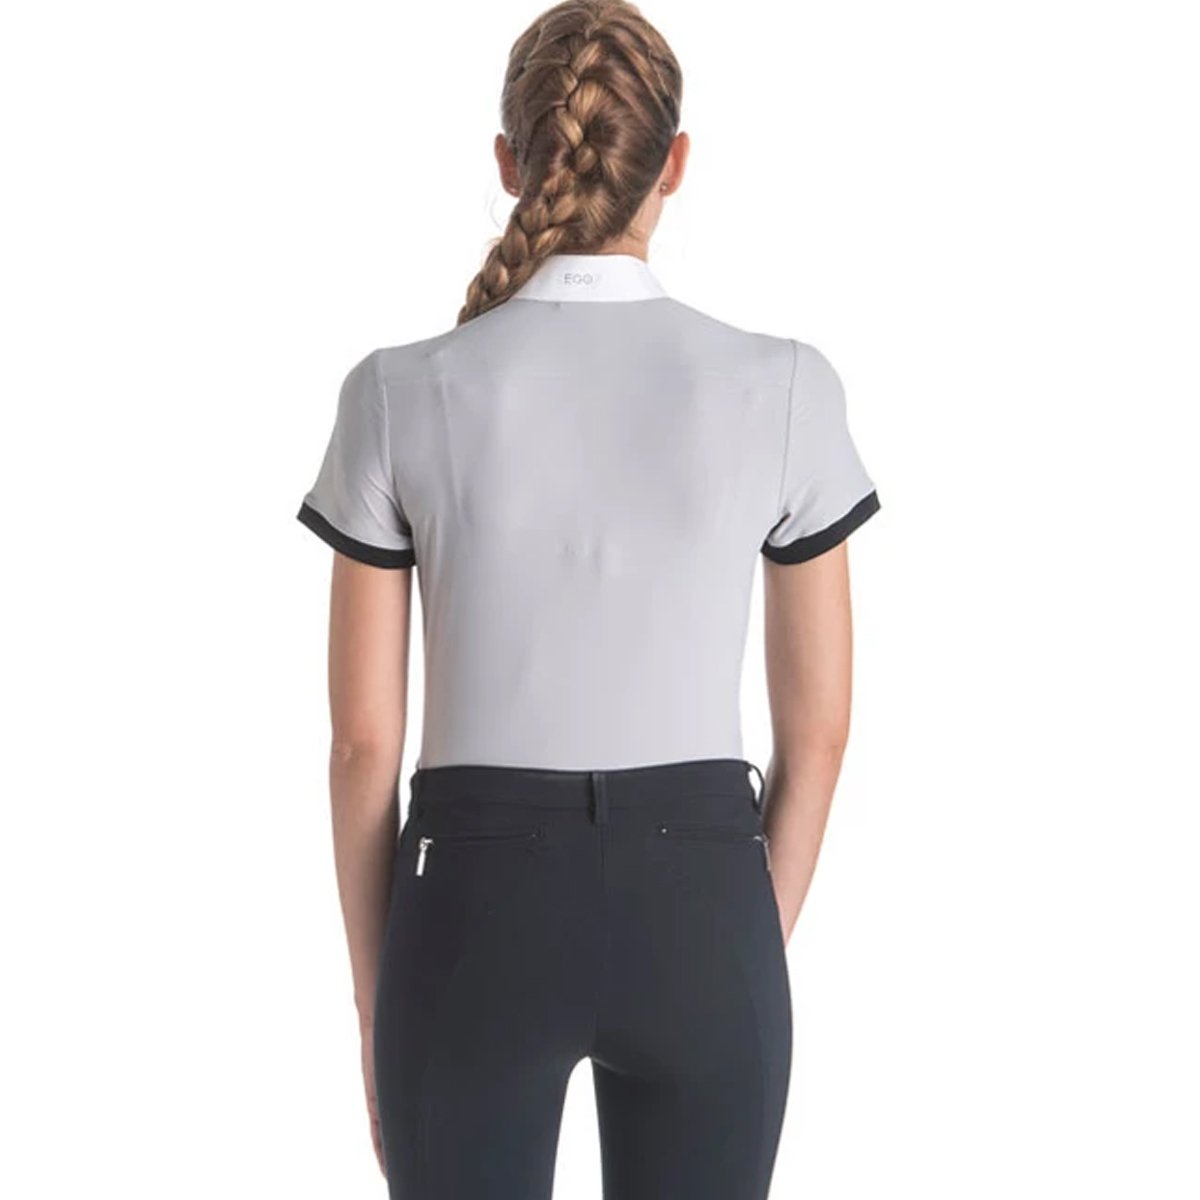 Ego7 Ladies Polo Competition Shirt